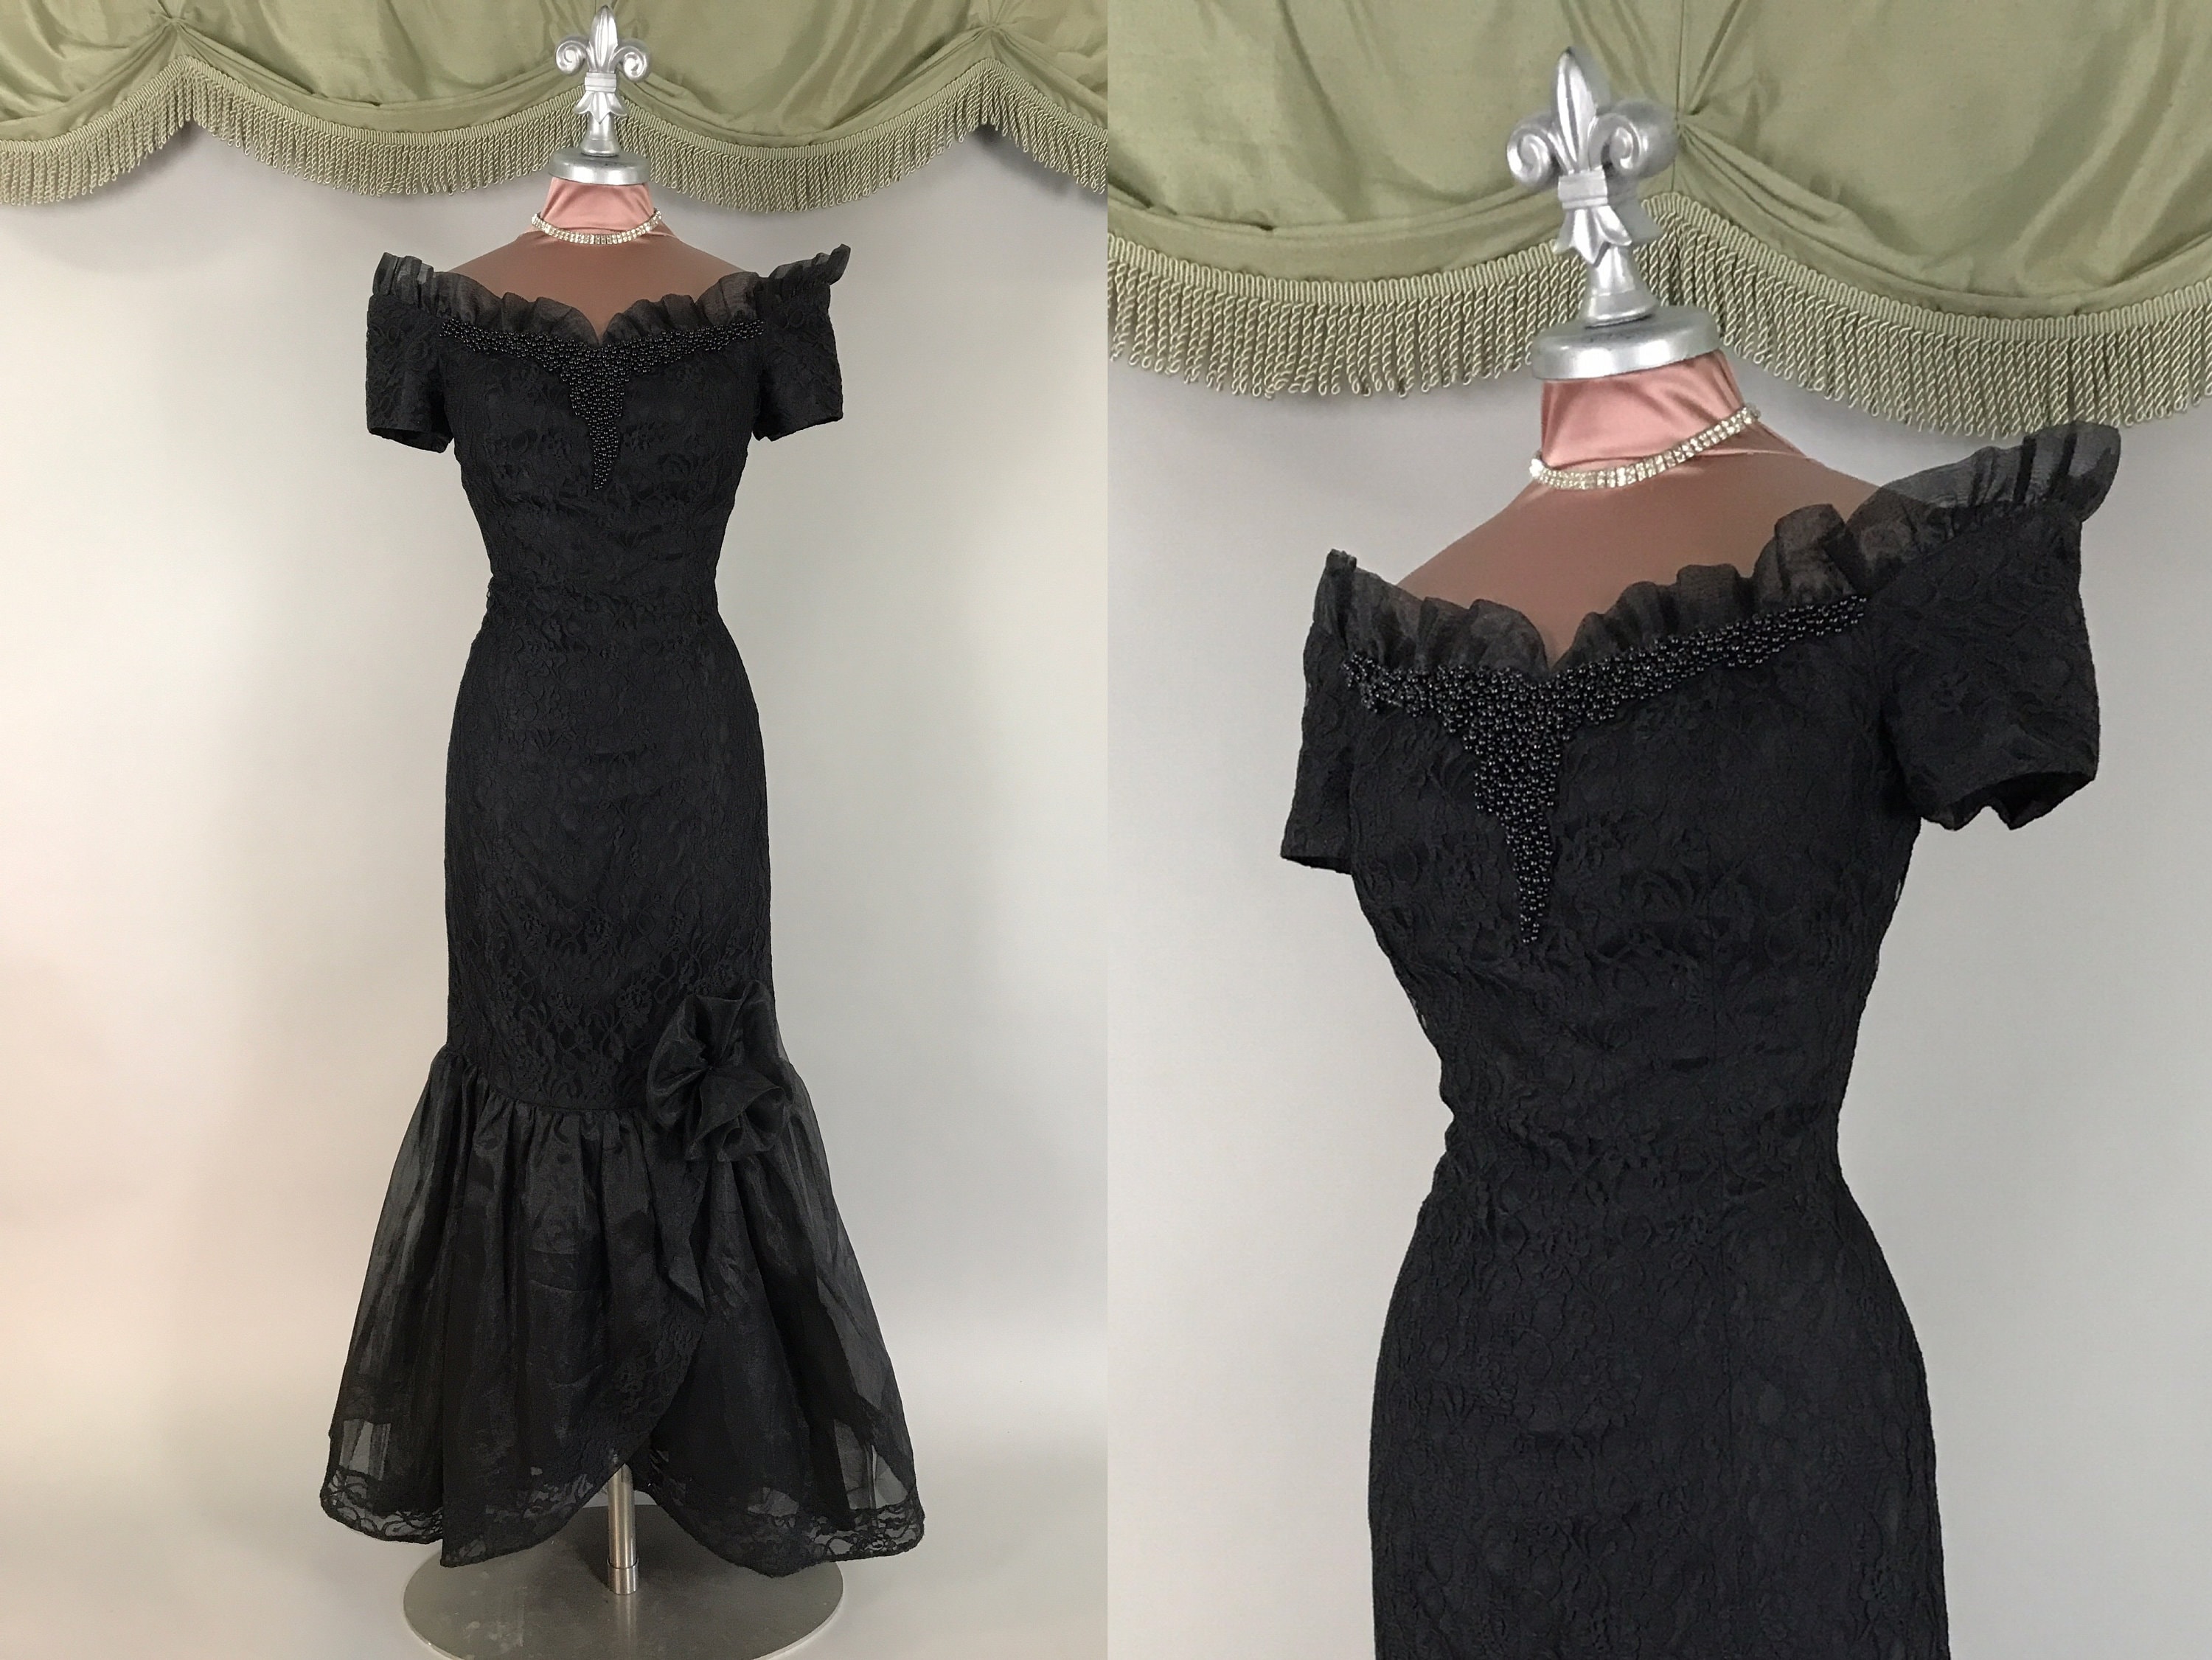 Vintage 1950s Black Dress, Full Circle Skirt, fits 35 inch bust, Lace &  Trapunto, 204 inch hem sweep